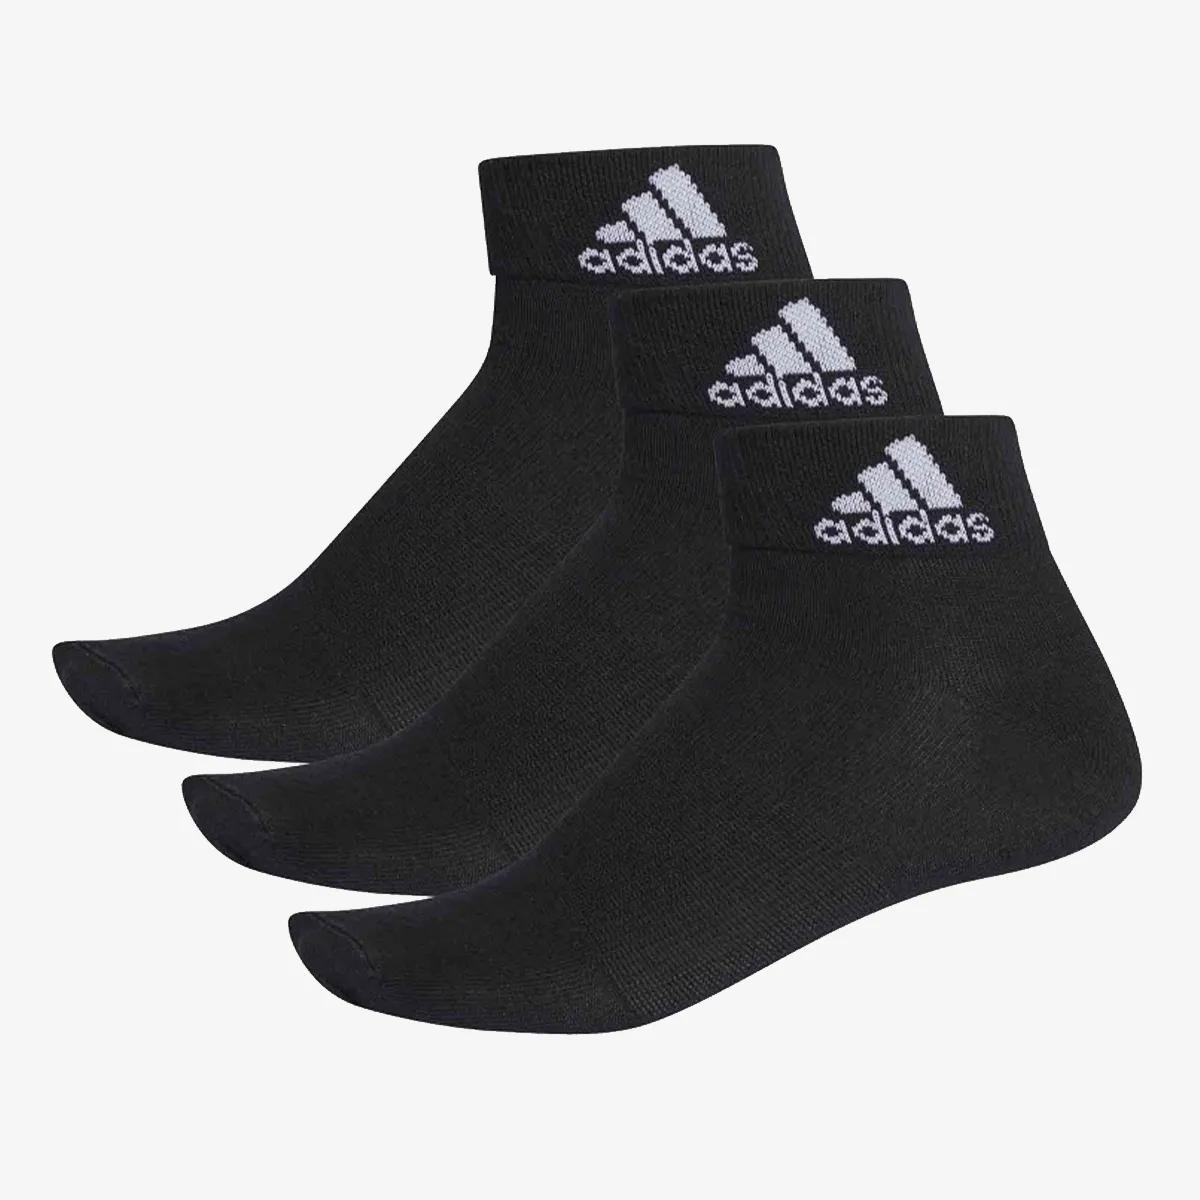 ADIDAS Per Ankle T 3pp 